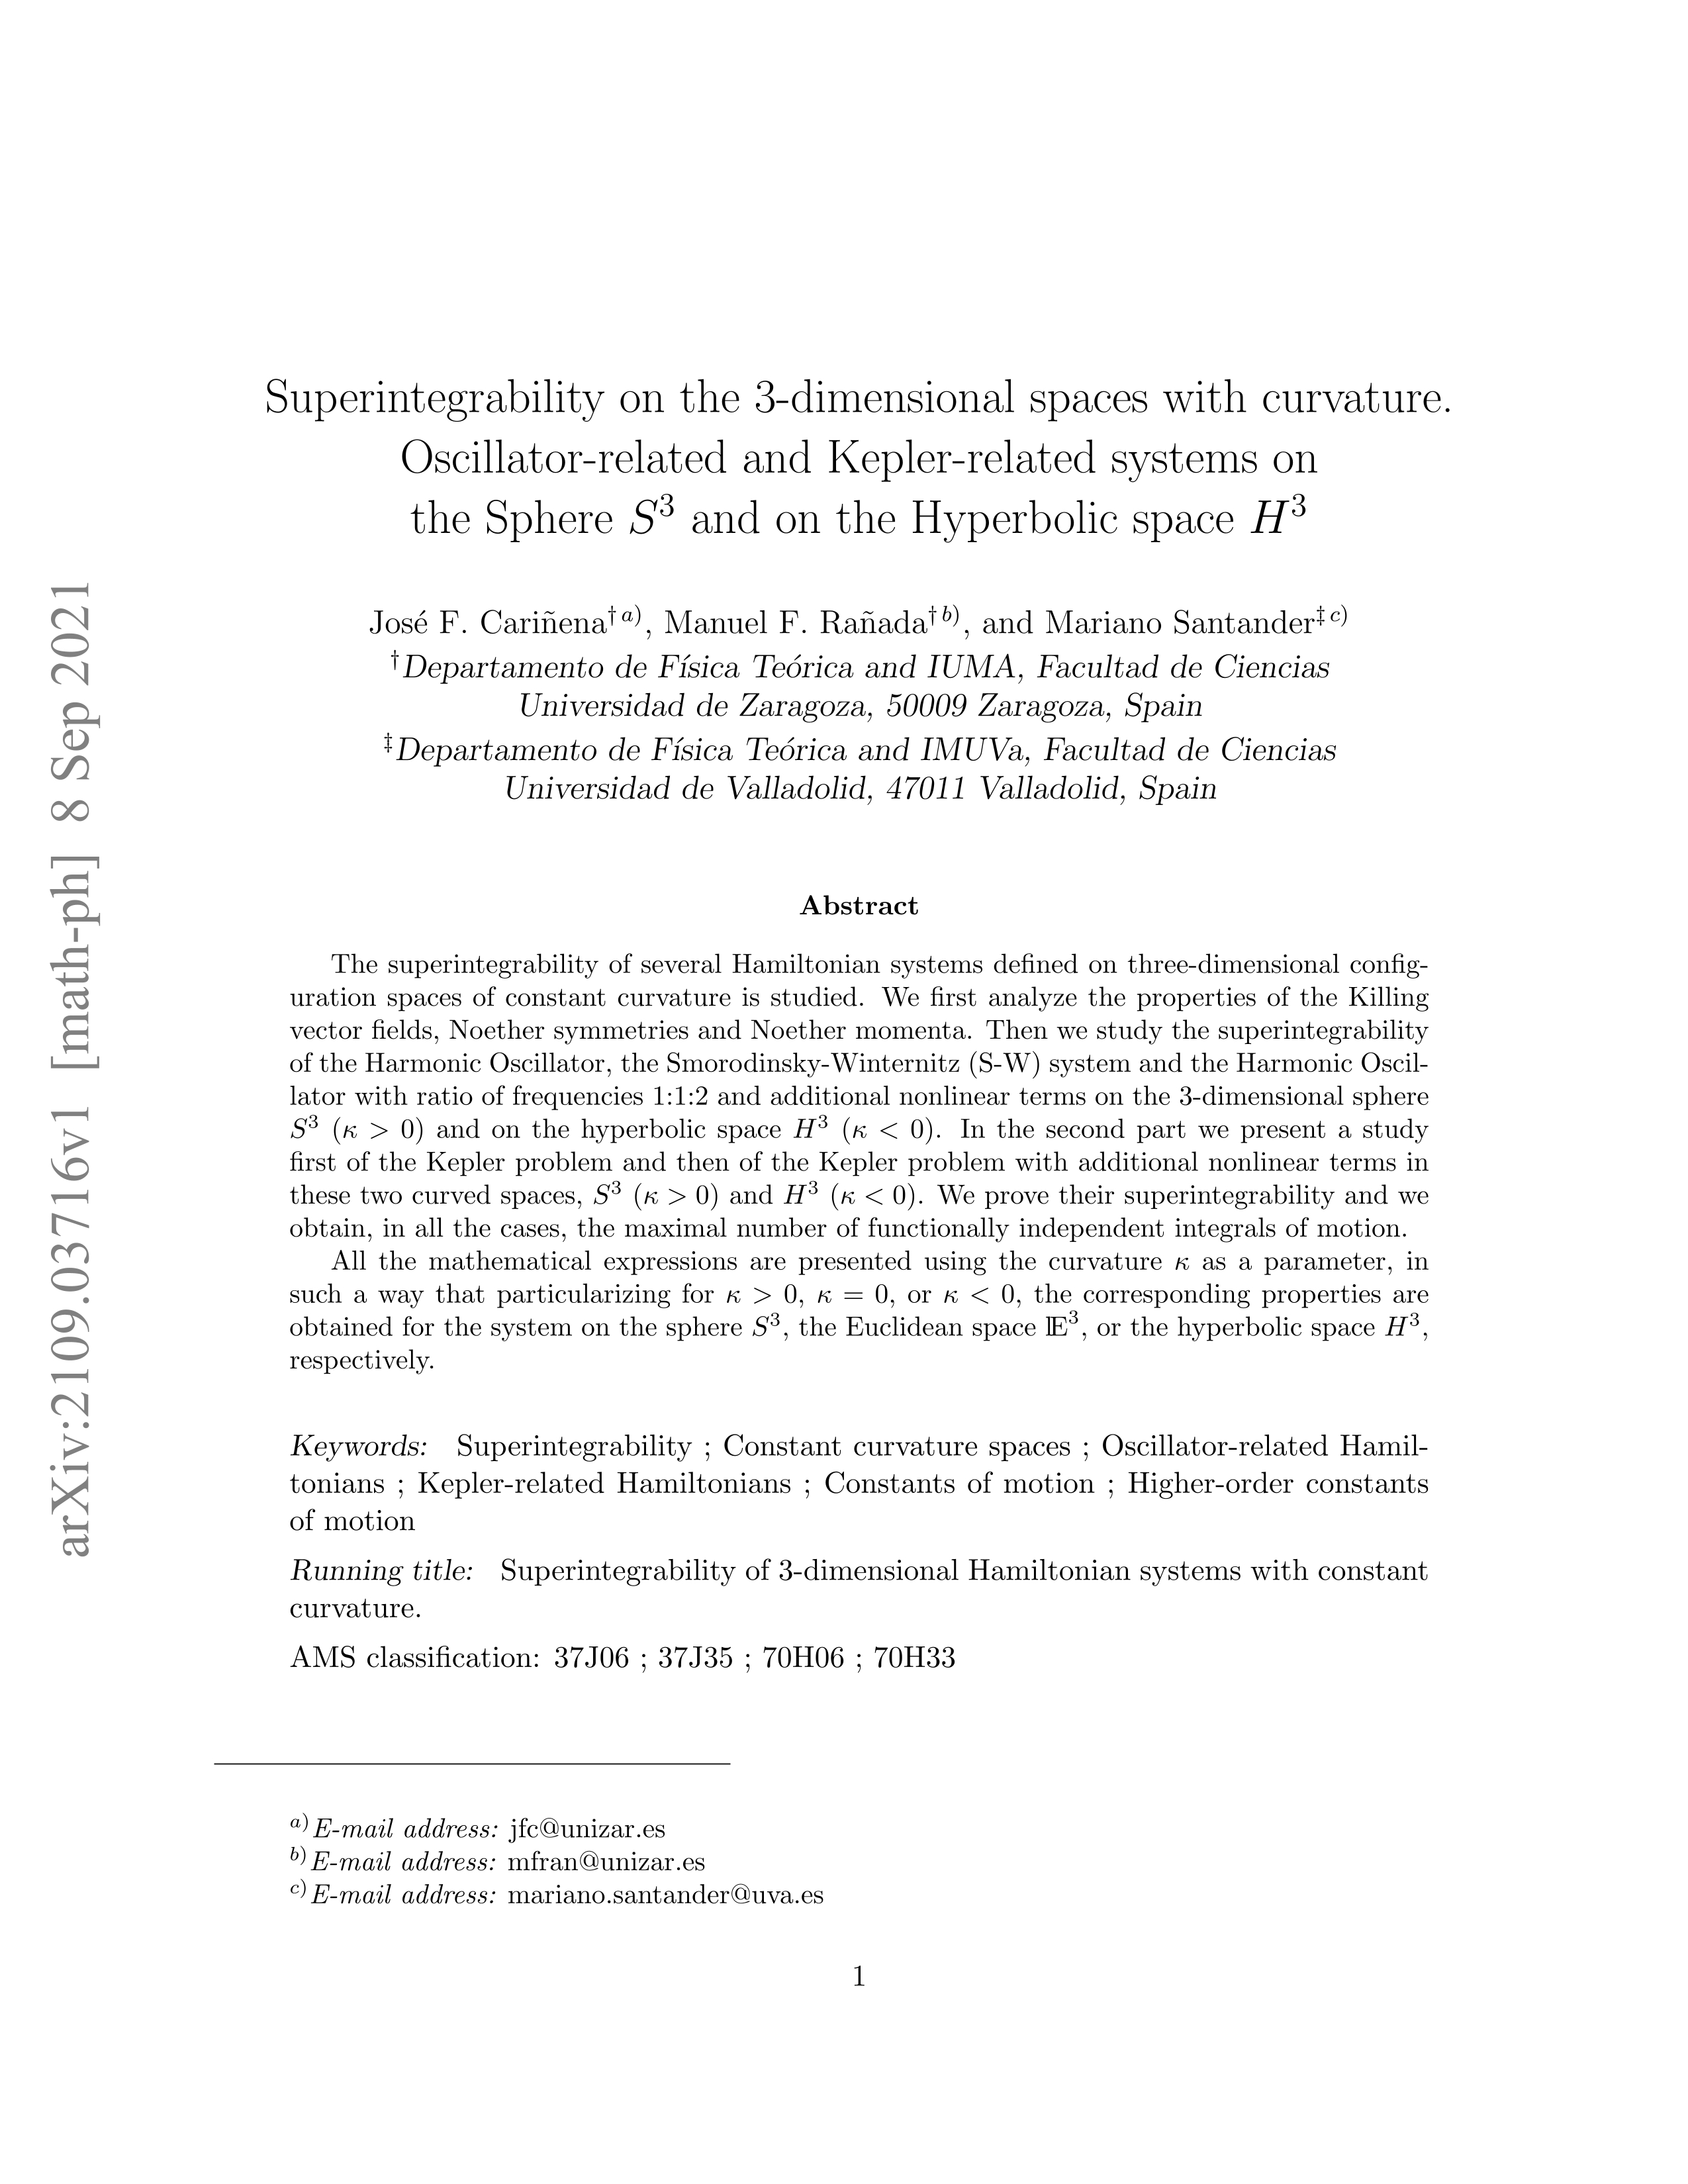 Superintegrability on the 3-dimensional  spaces with curvature. Oscillator-related and Kepler-related systems  on  the Sphere $S^3$ and on the Hyperbolic space $H^3$